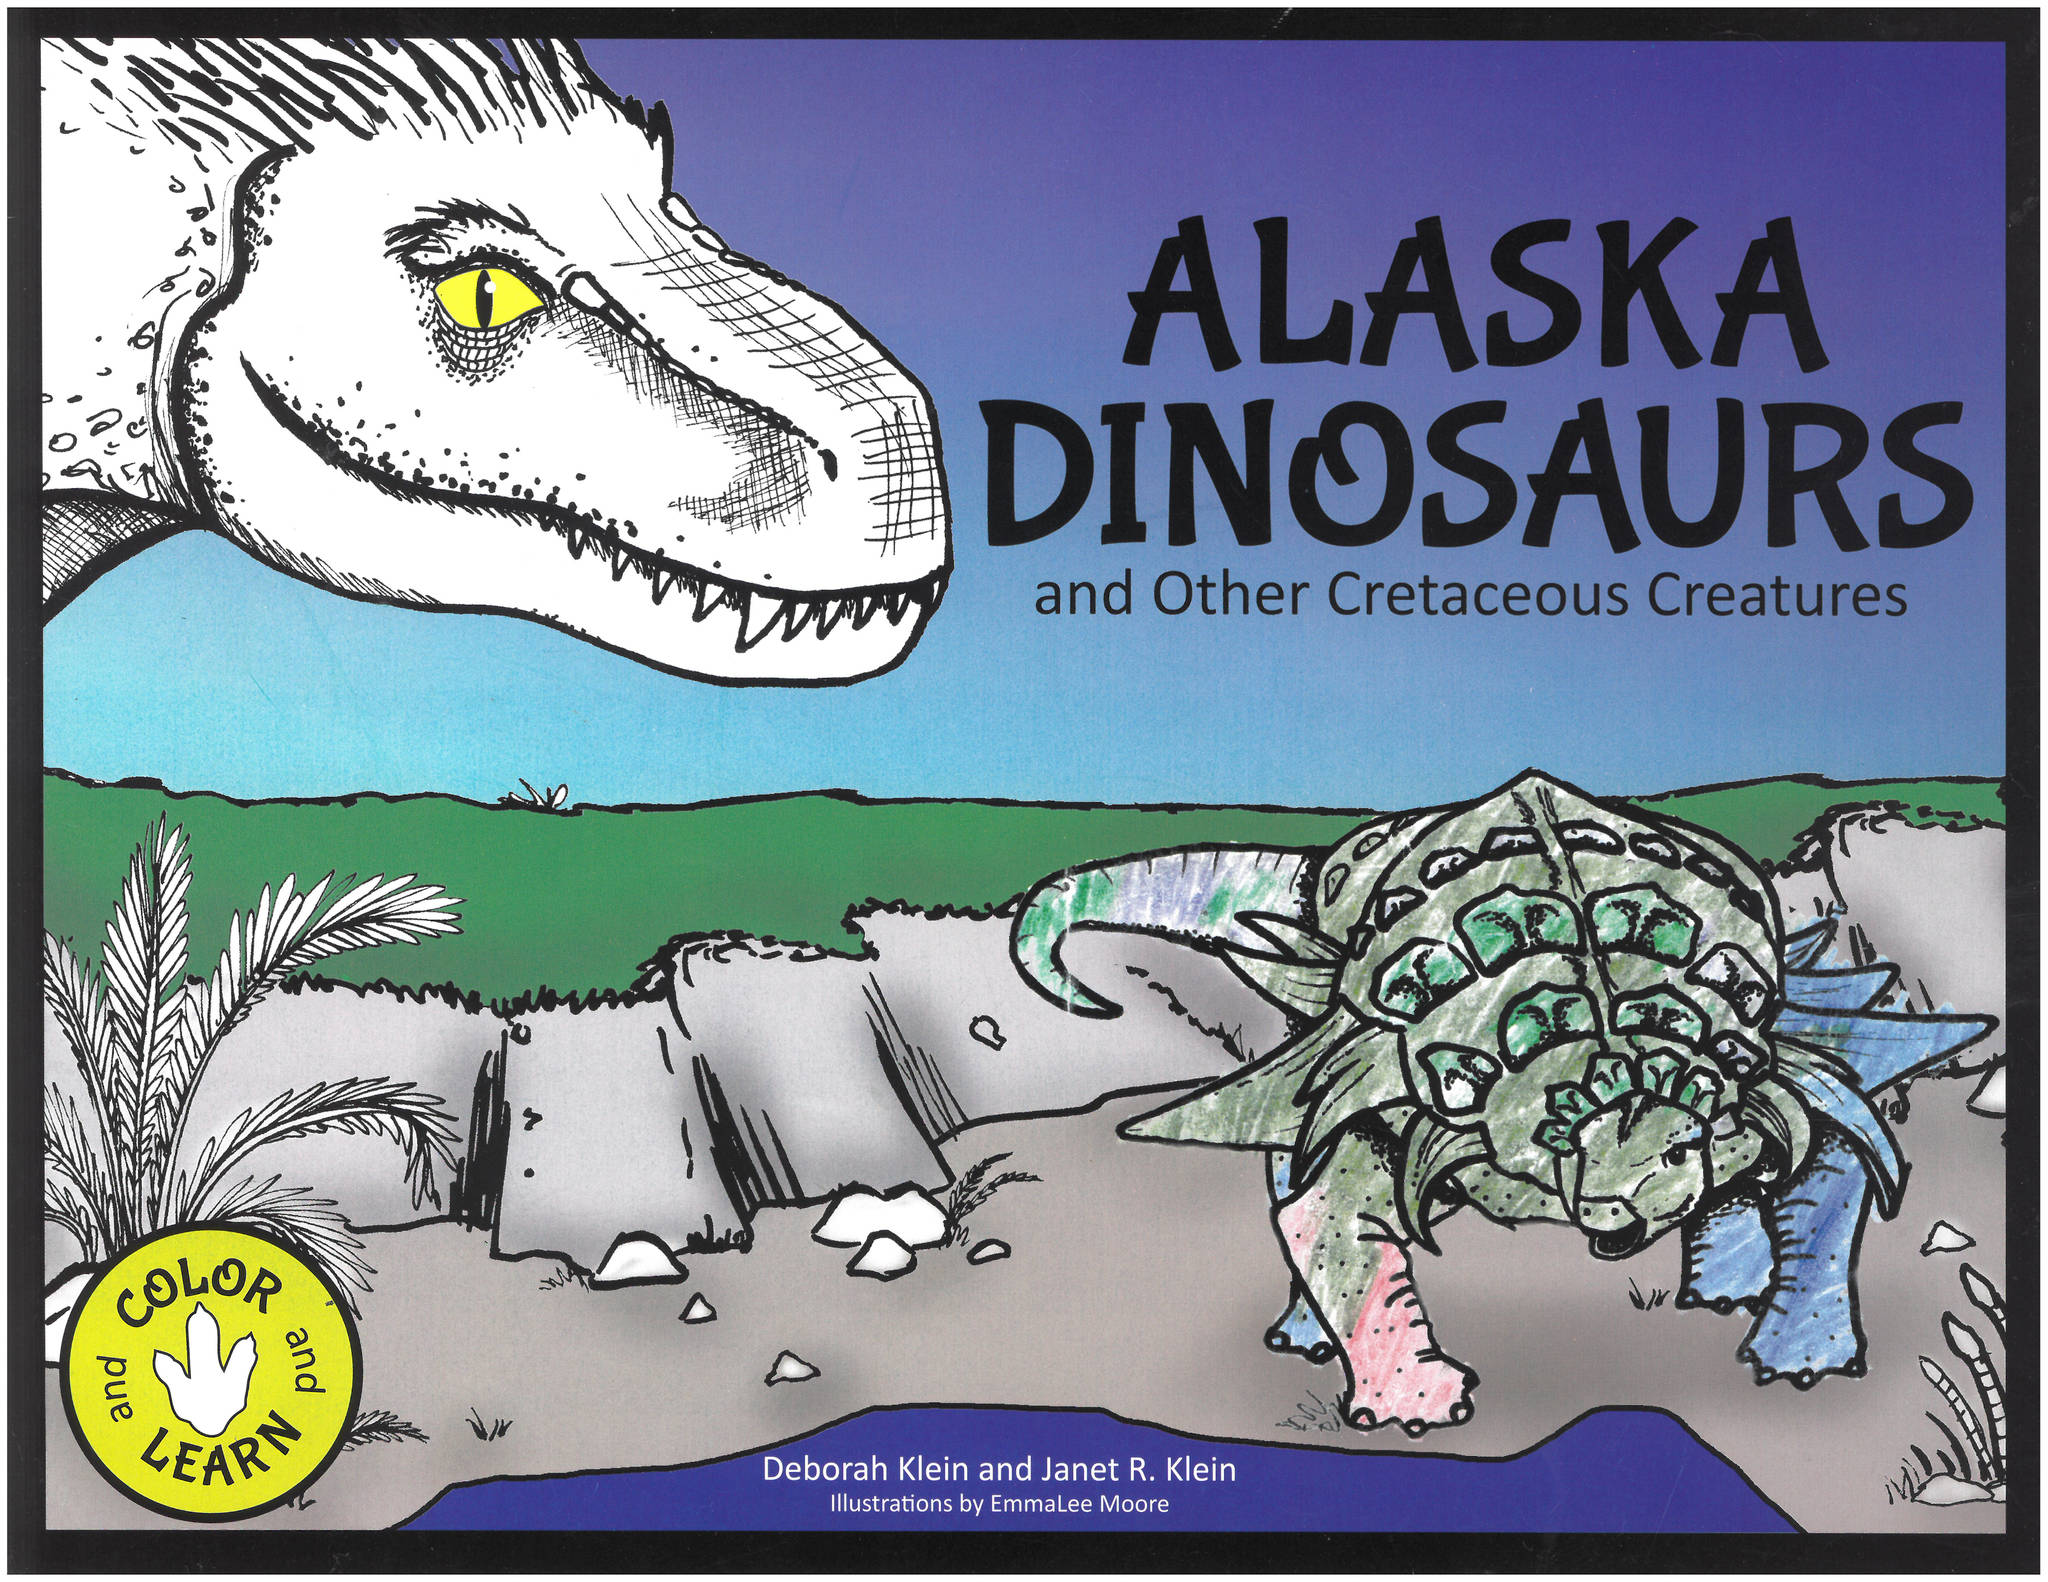 The cover of “Alaska Dinosaurs and Other Cretaceous Creatures,” written by Deborah Klein and Janet R. Klein and illustrated by EmmaLee Moore. (Image provided)